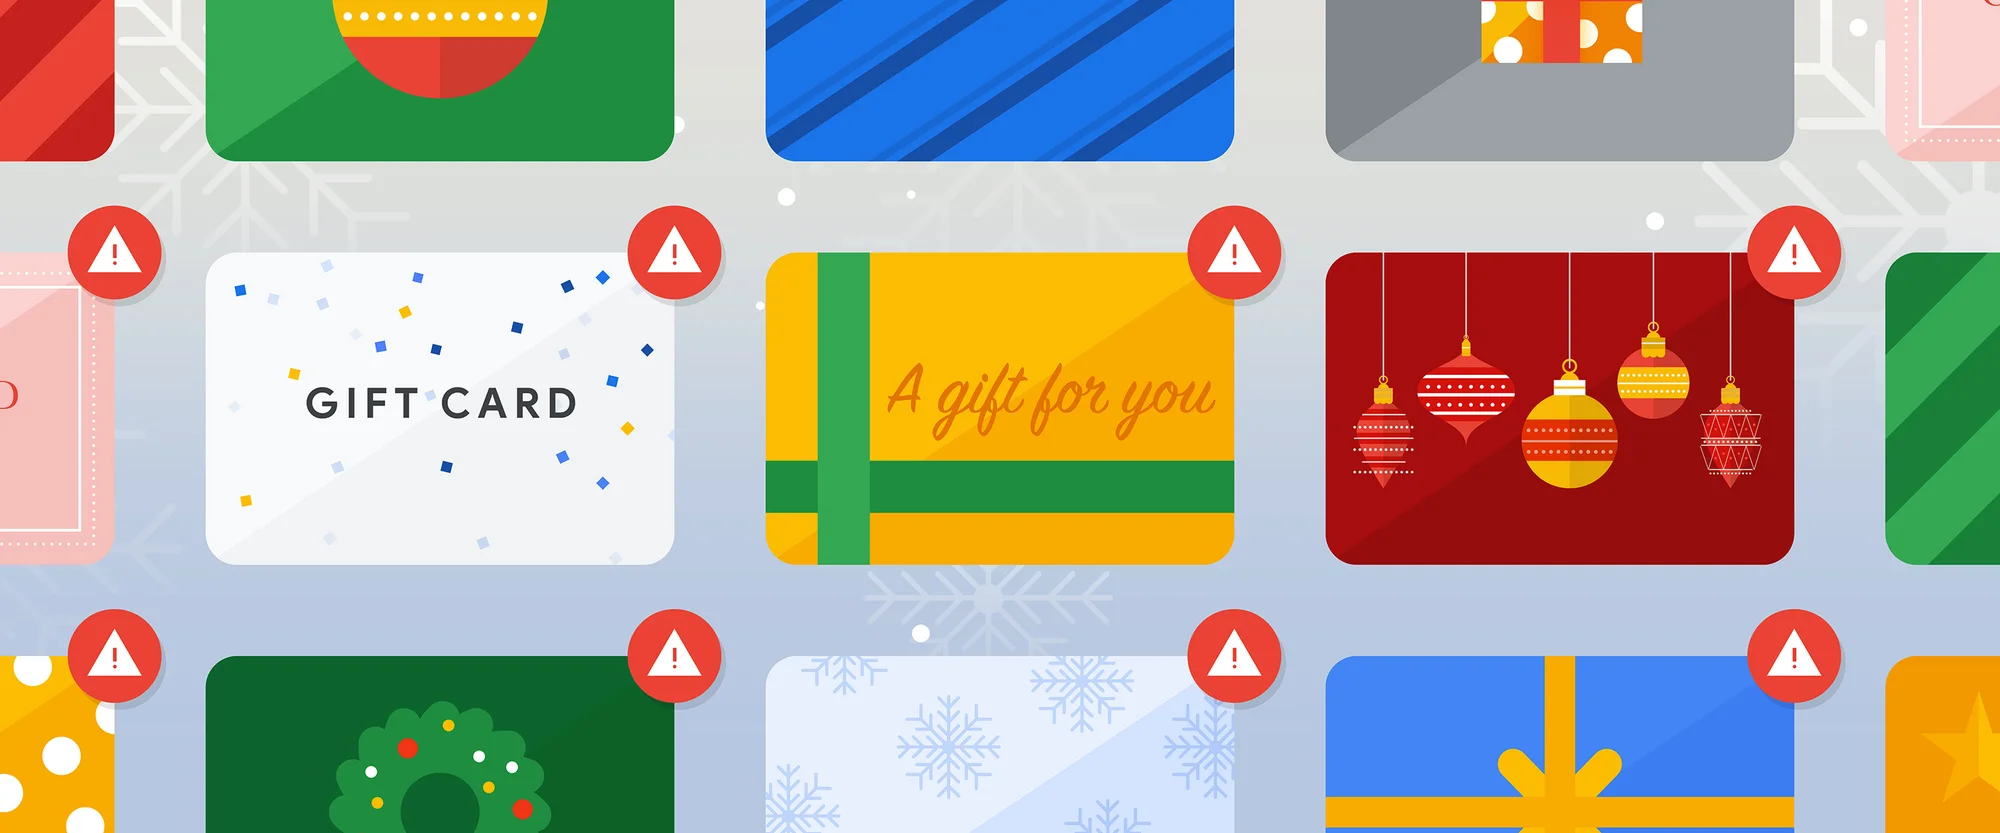 Gift card scams affecting Canadians across the country